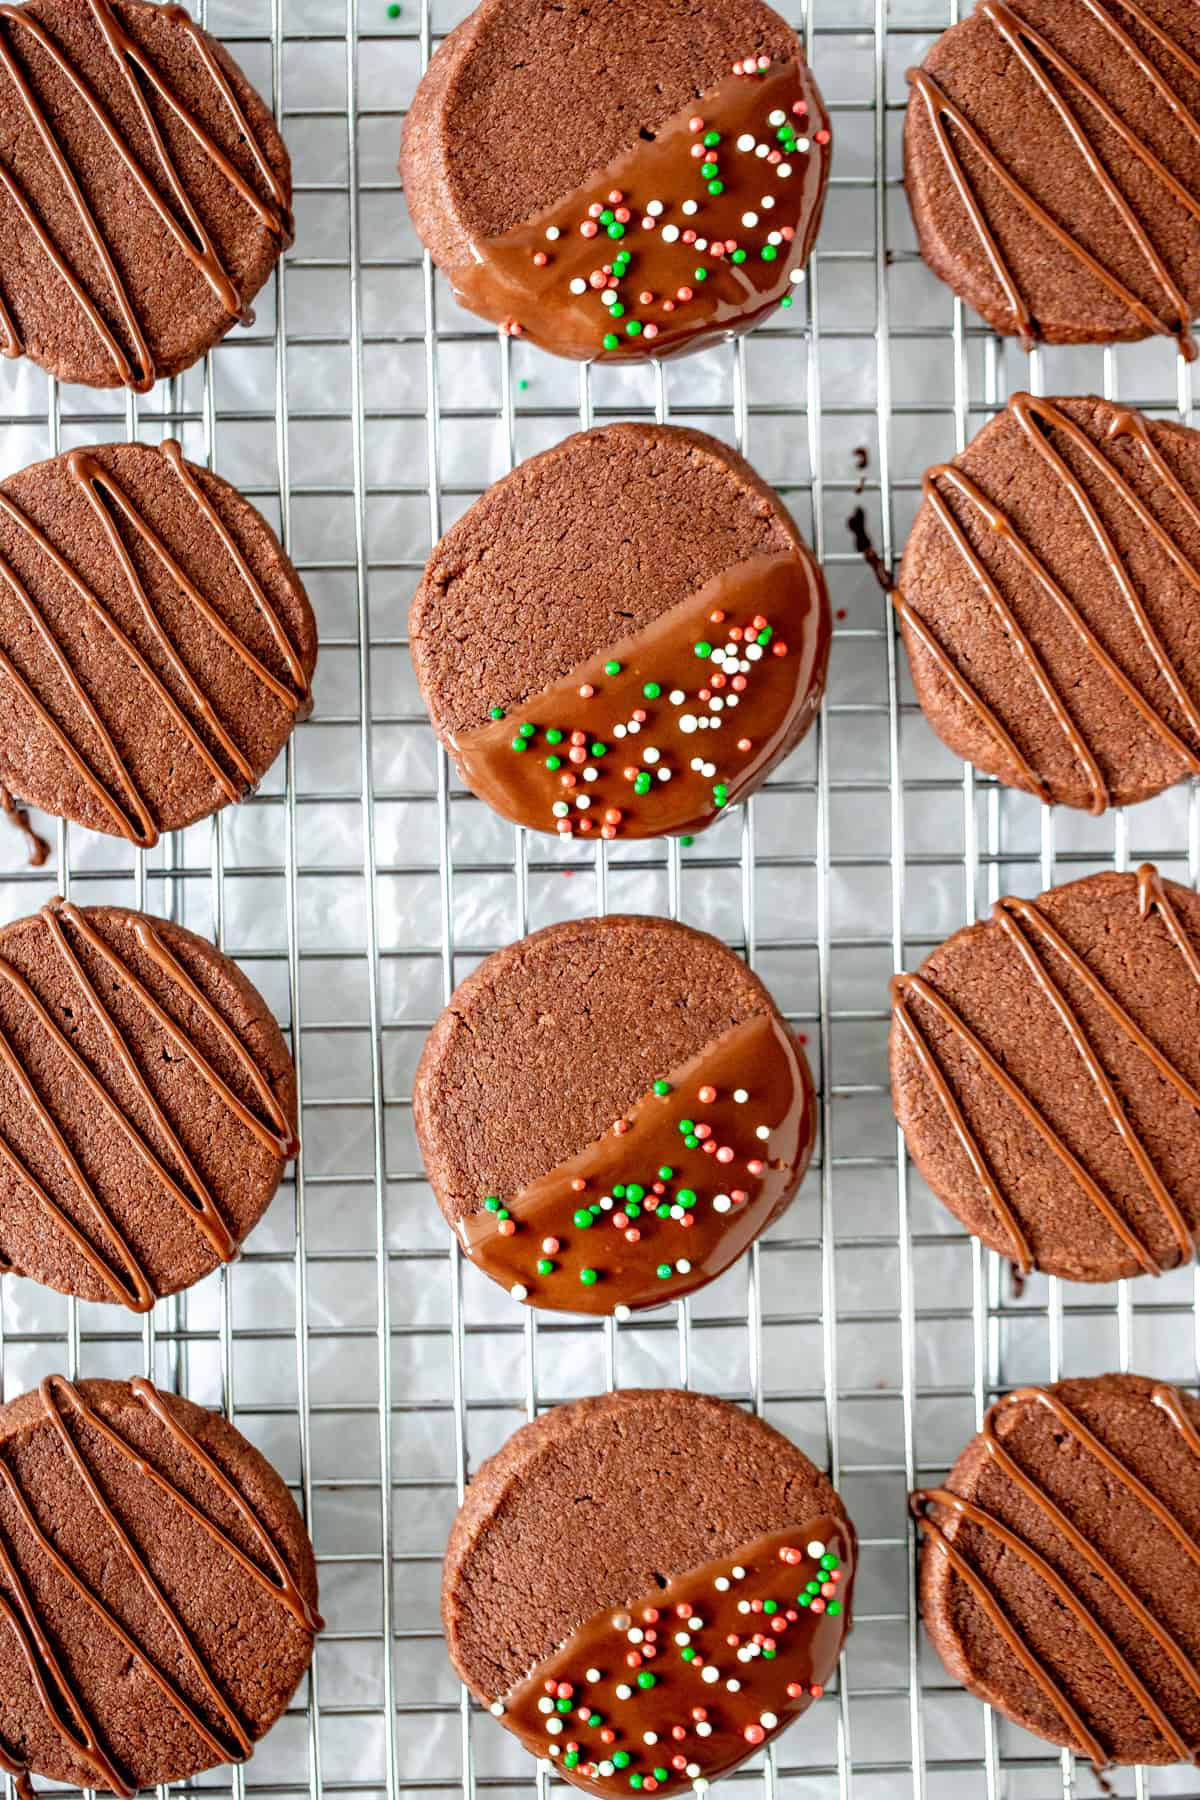 Chocolate cookies decorated with chocolate on a cooling rack